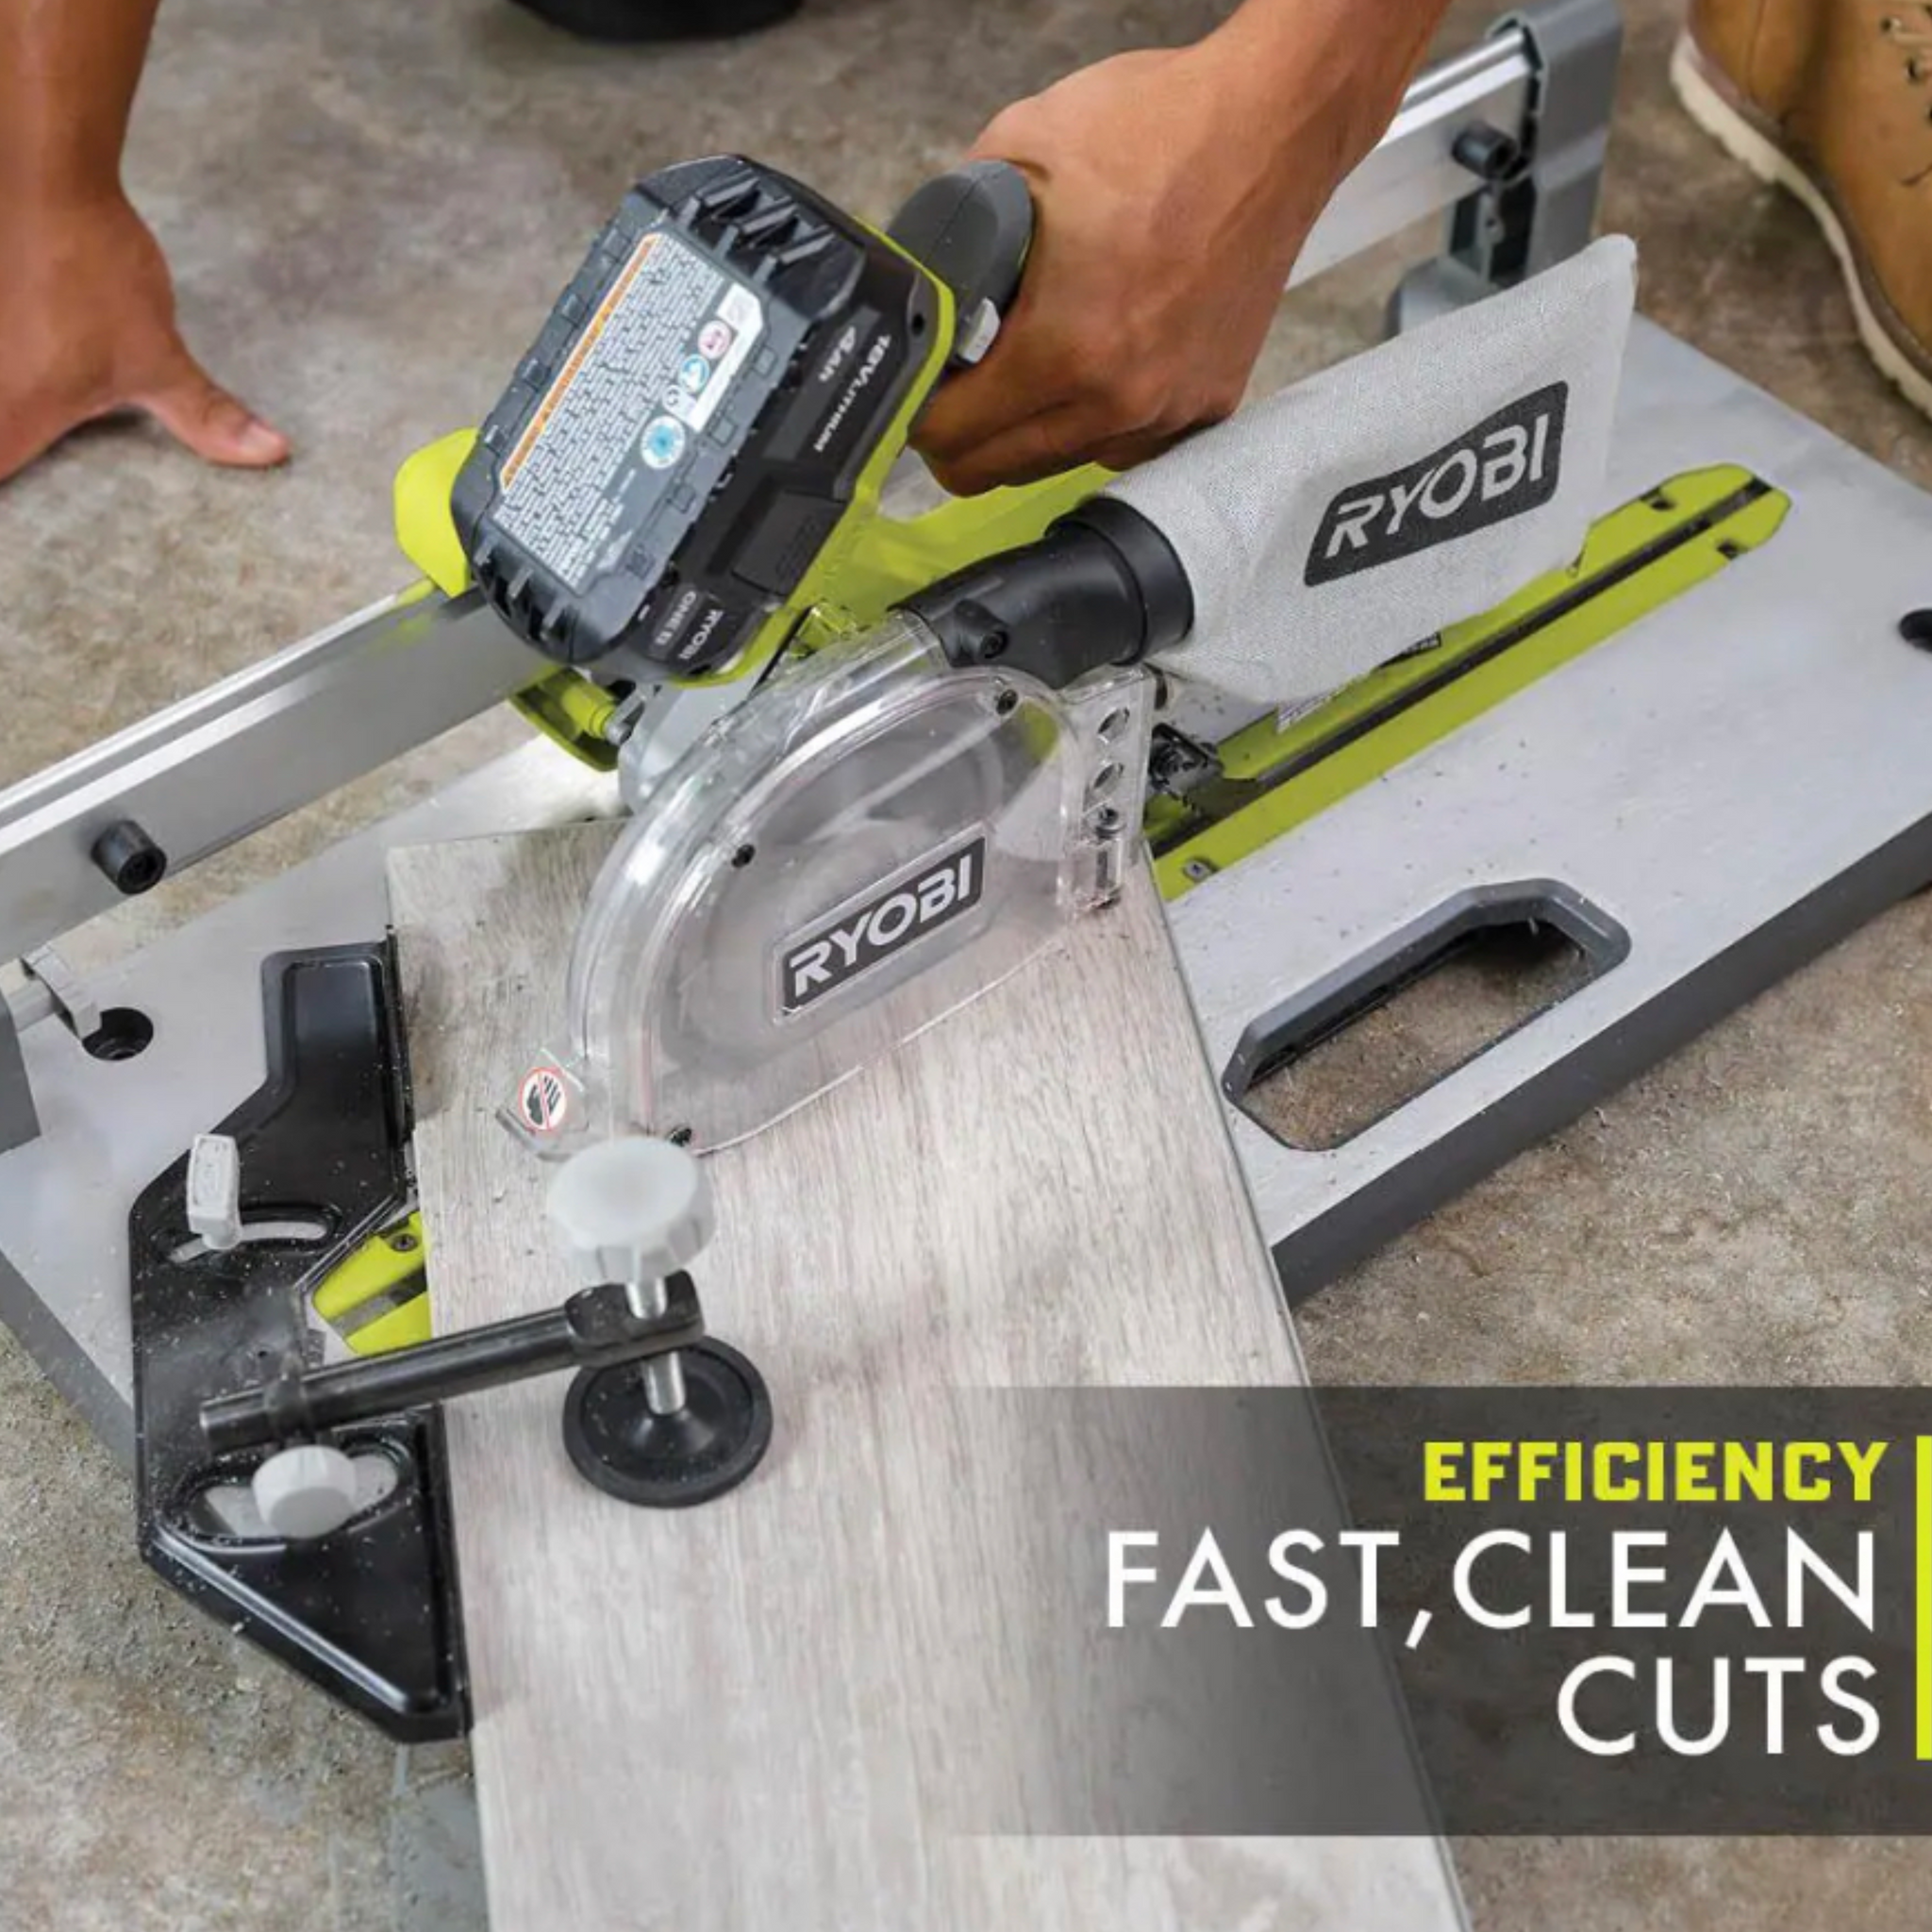 RYOBI ONE+ 18V 5-1/2 in. Flooring Saw with Blade (Tool Only) – Ryobi Deal